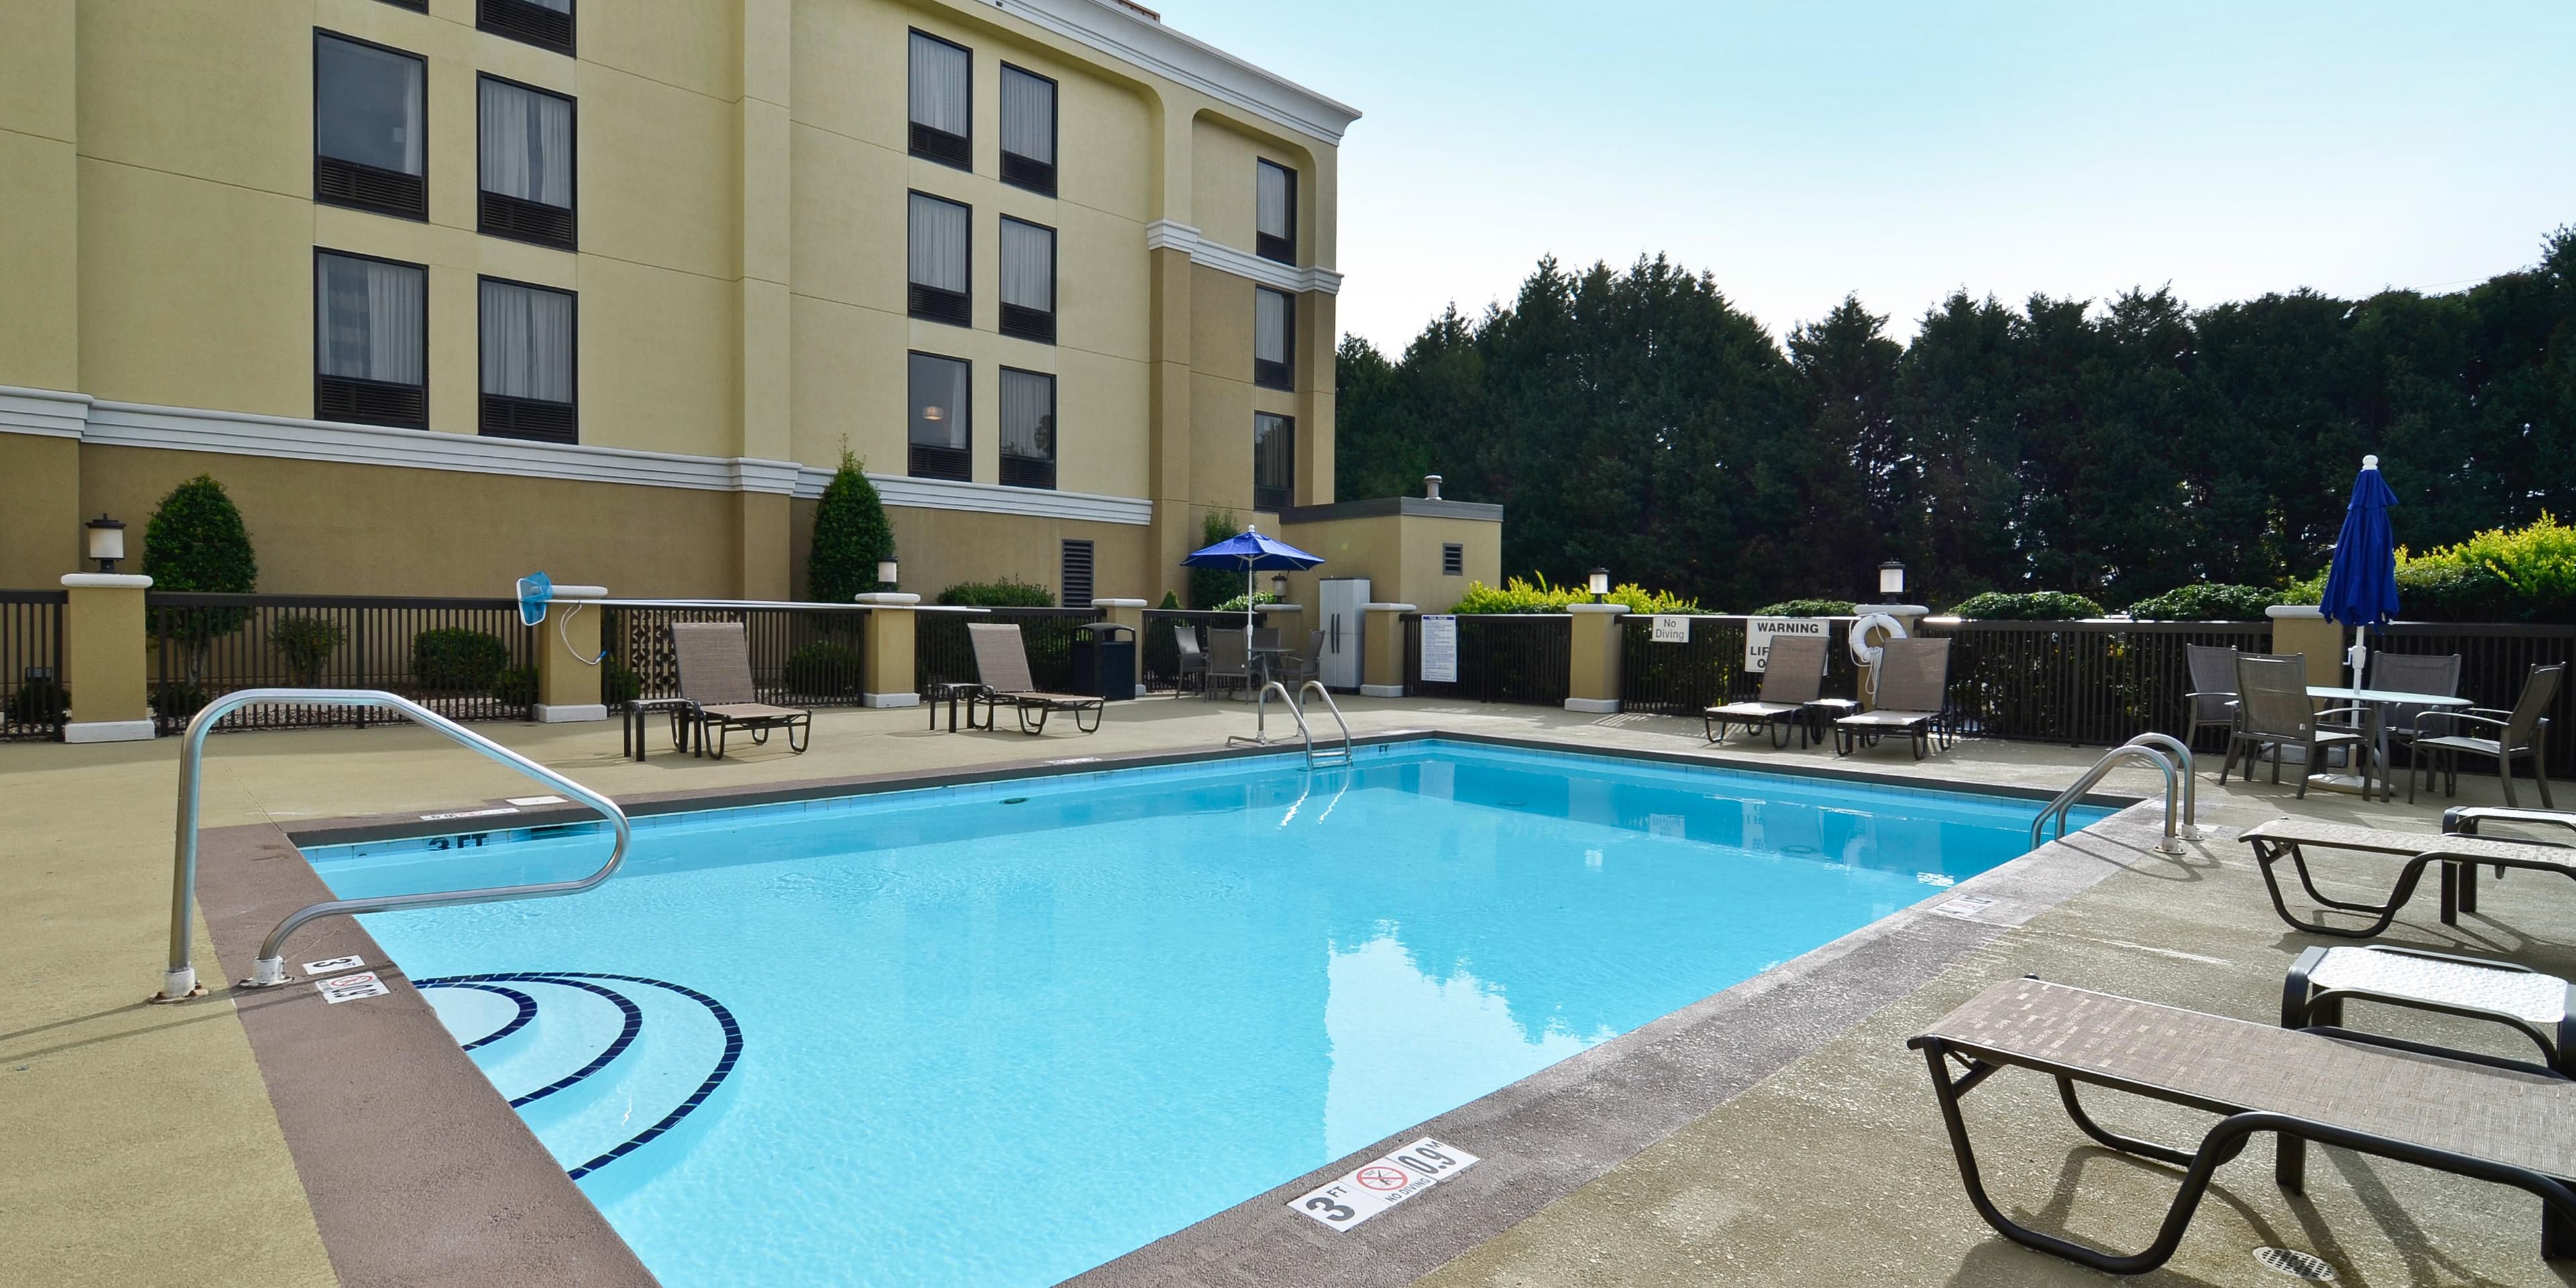 The outdoor pool at Holiday Inn Express in Burlington, NC is a refreshing oasis for guests to relax and unwind. With plenty of lounge chairs and umbrellas, guests can enjoy a day in the sun or take a refreshing dip. The pool is open seasonally and is a great way to cool off during the hot summer months.